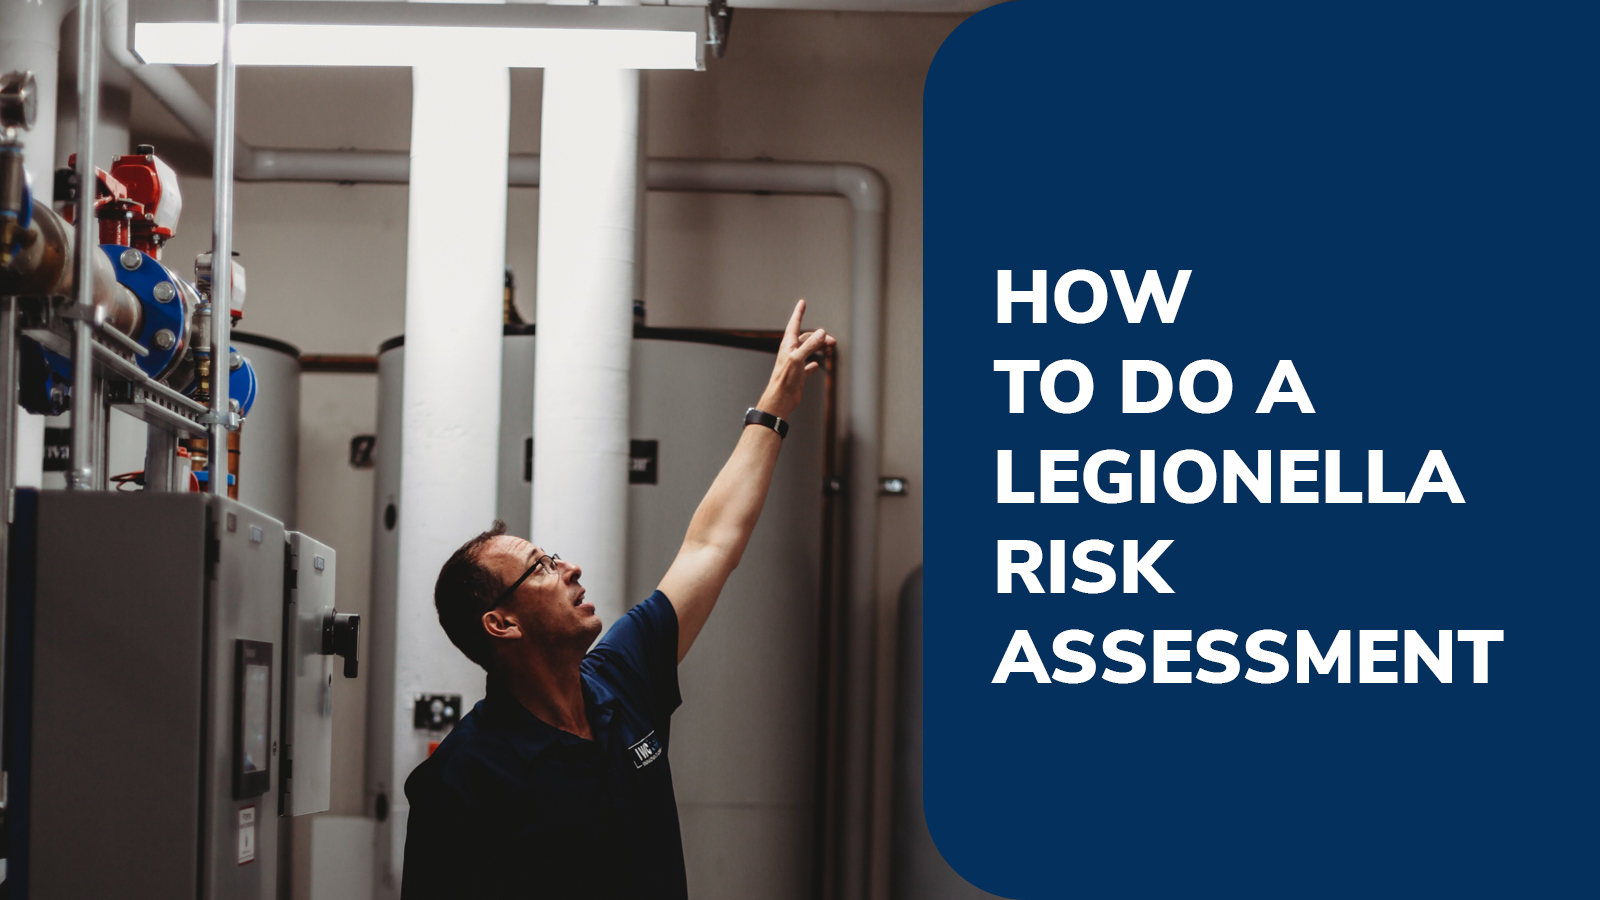 How to do a Legionella Risk Assessment